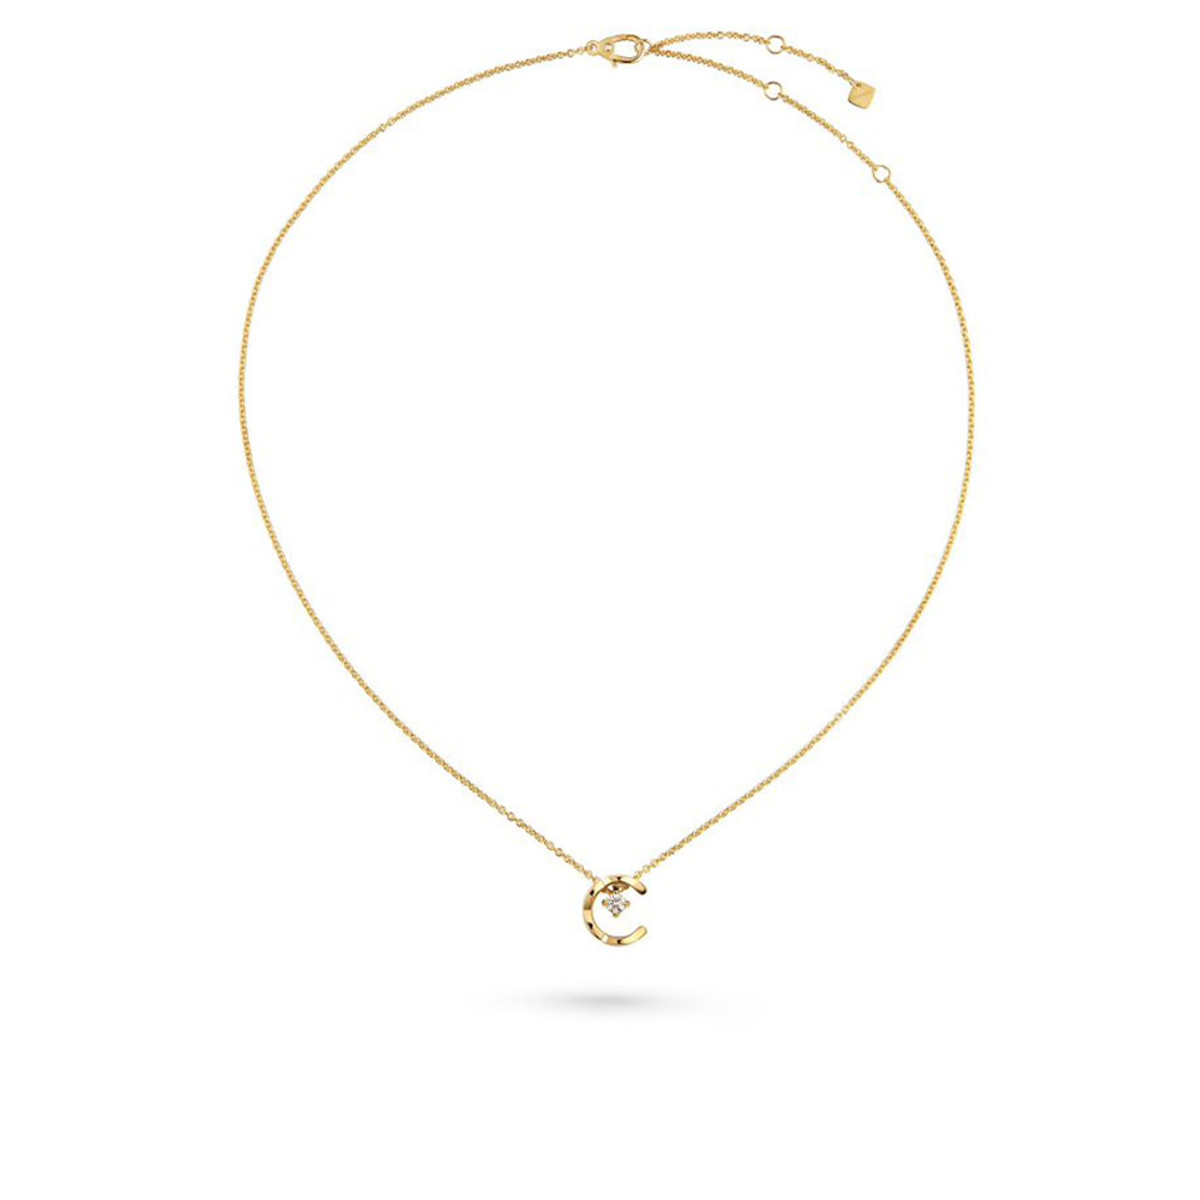 CHANEL COCO Necklace-39079 Product Image